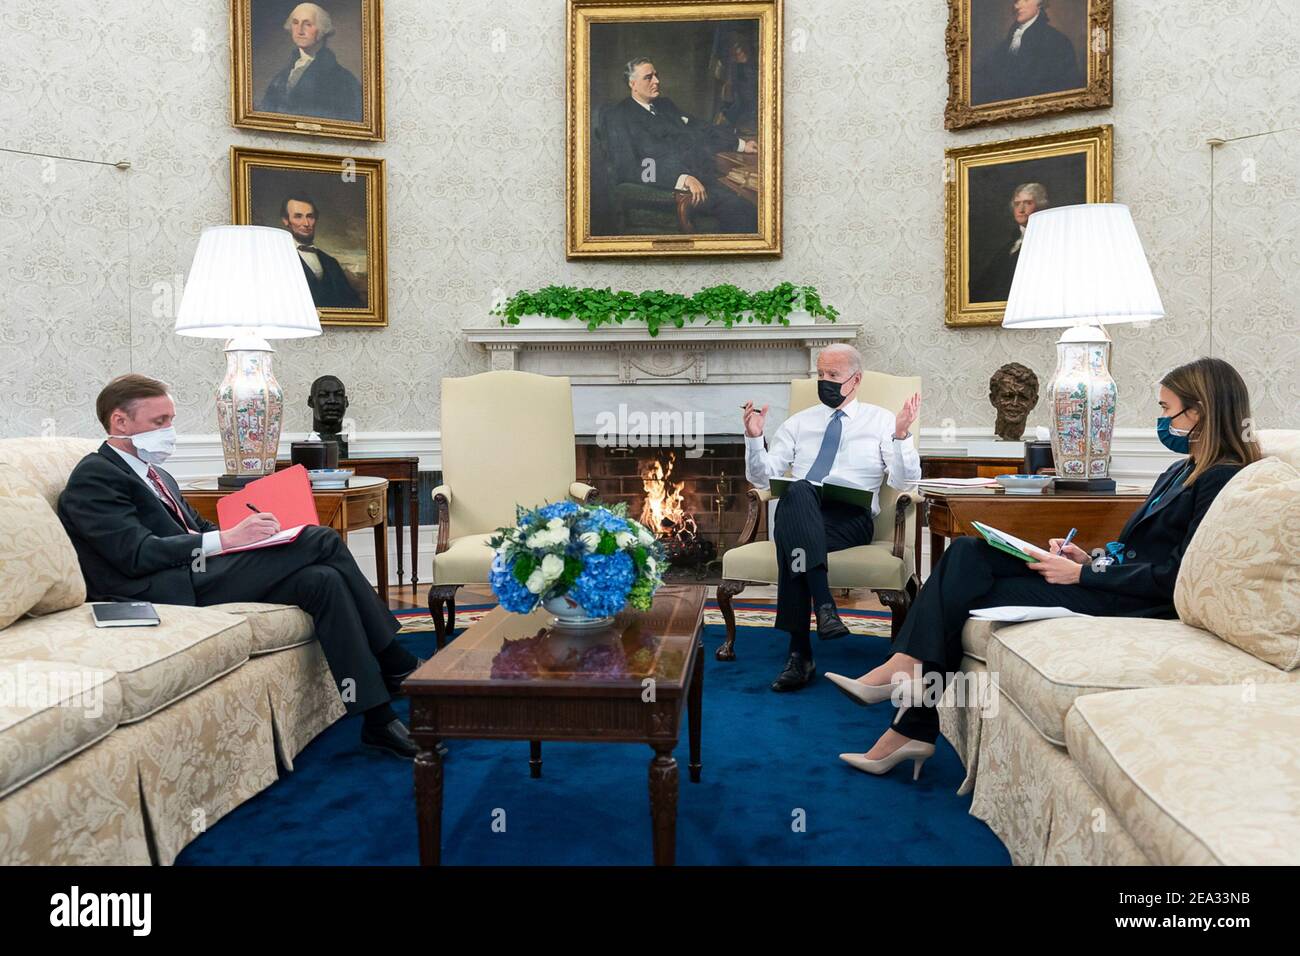 U.S President Joe Biden talks with National Security Adviser Jake Sullivan and Senior Director for Europe Amanda Slaot, prior to a phone call with German Chancellor Angela Merkel, in the Oval Office of the White House January 25, 2021 in Washington, D.C. Stock Photo